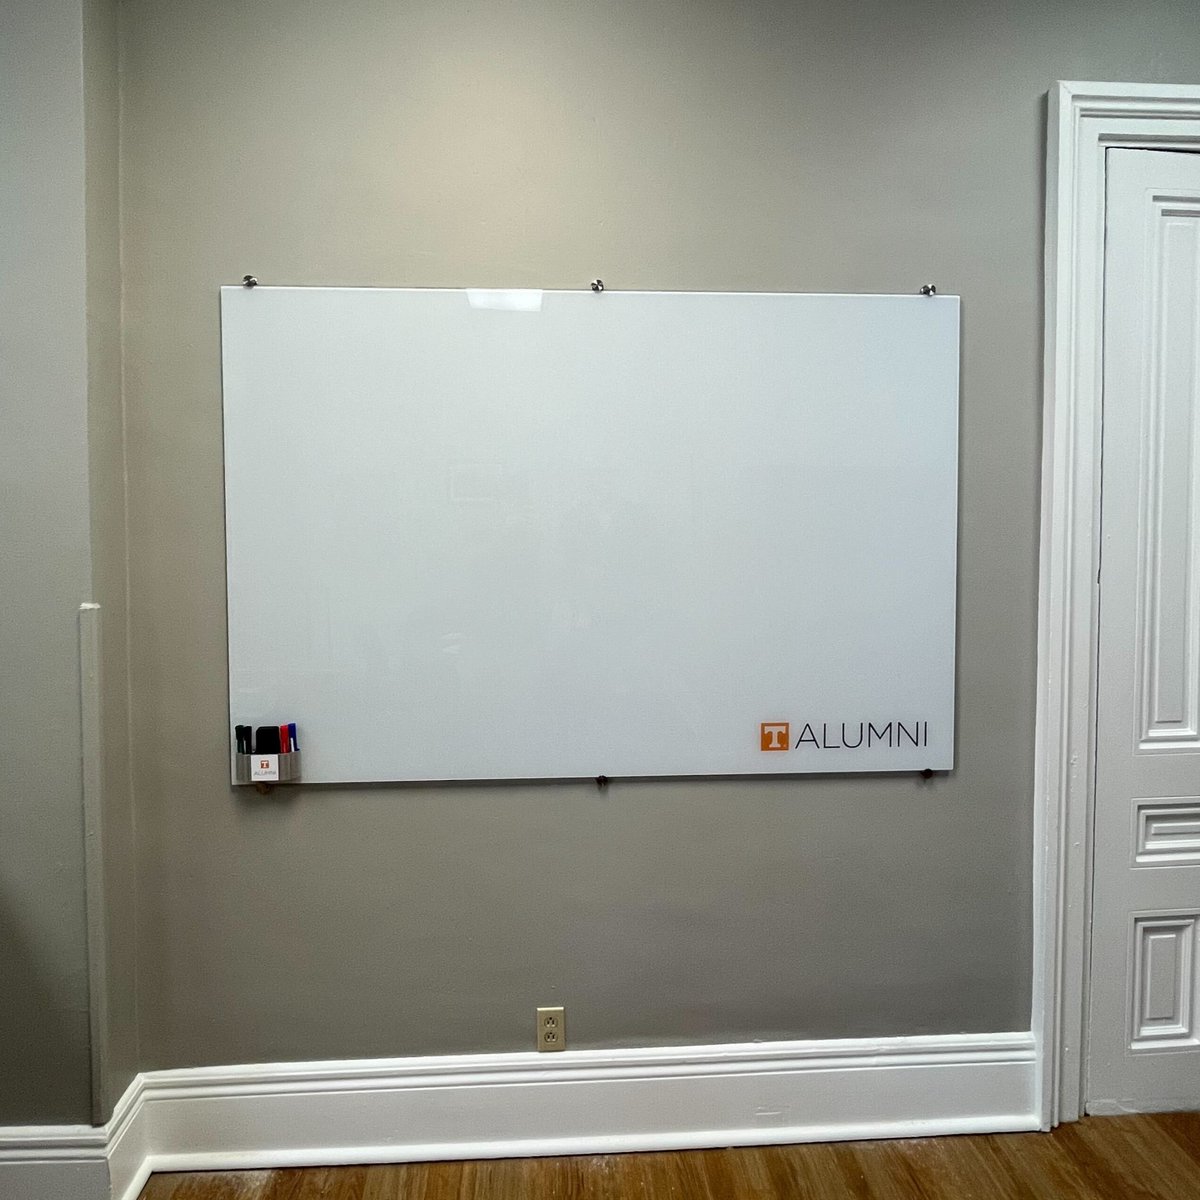 Add your branding wherever you are! Check out this custom white board for UT Alumni. #graphiccreations #buildyourbrand #knoxvilletn #signage #displays